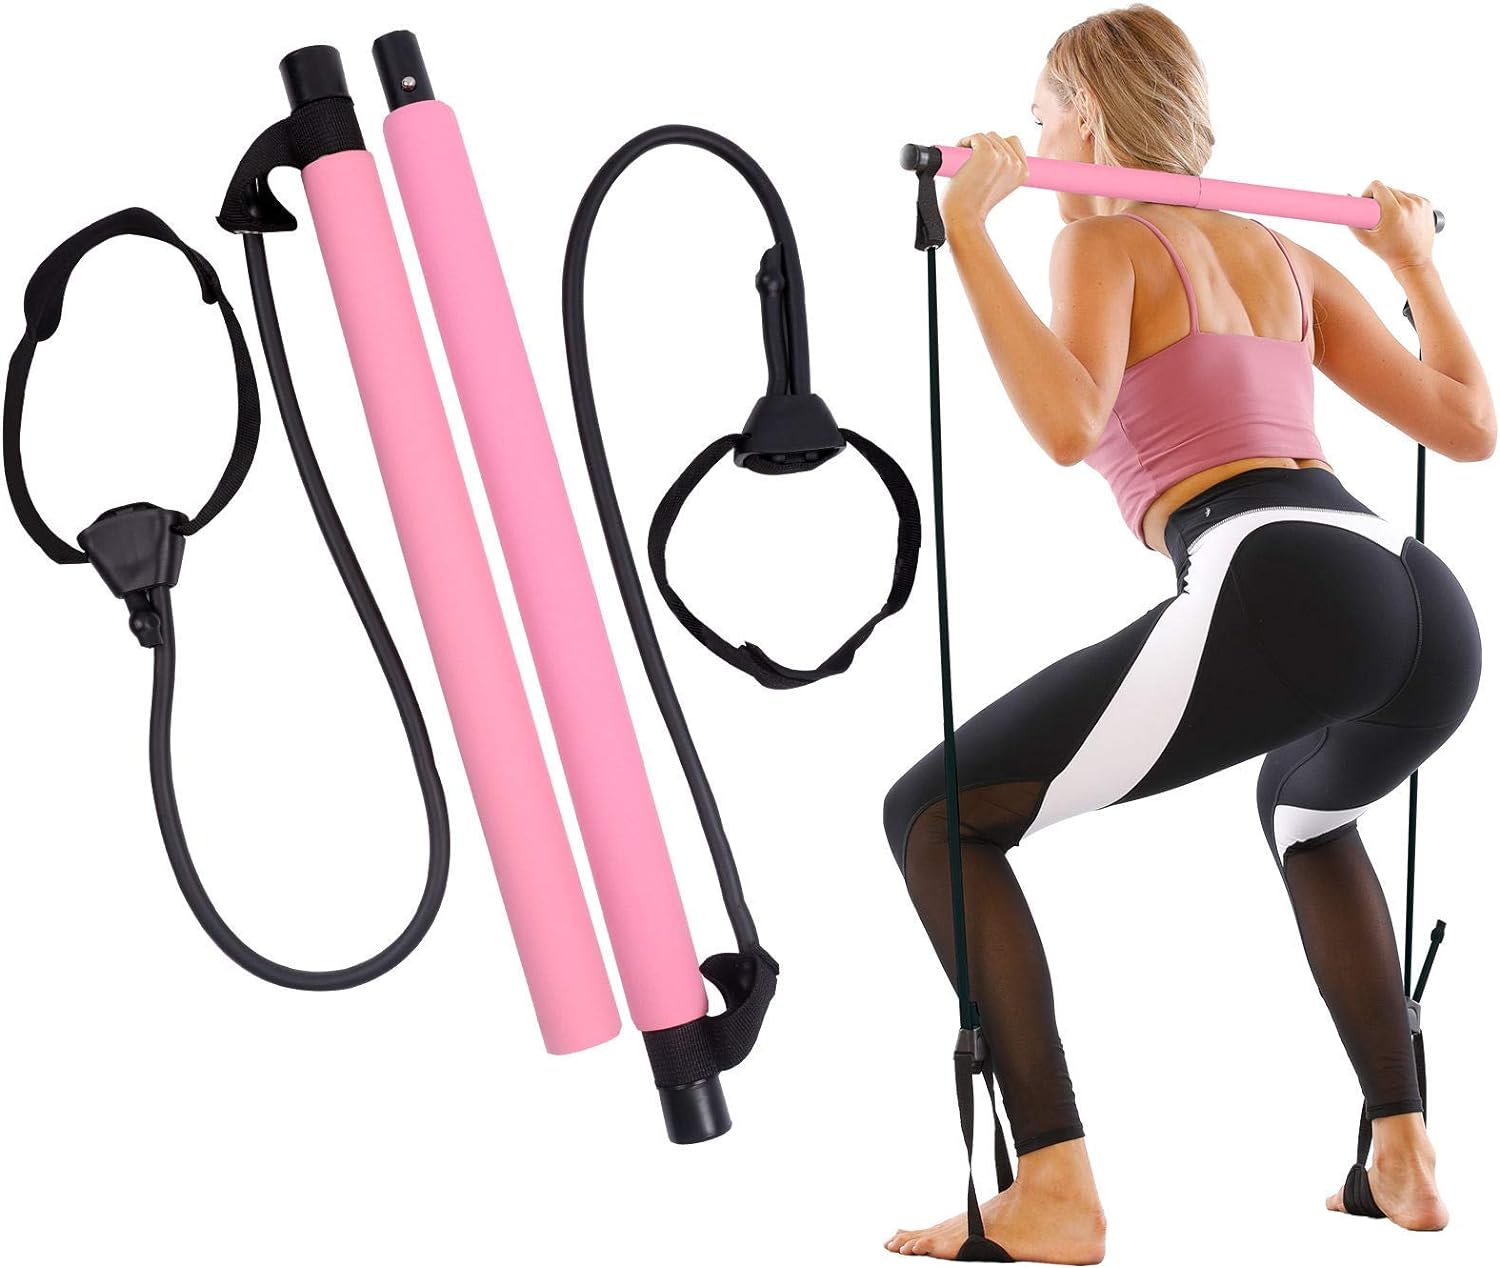 GLKEBY Pilates bar kit,with adjustable resistance band portable pilates exercise bar stick for stretching, yoga, shaping,exercise,Sit-ups,lose weight